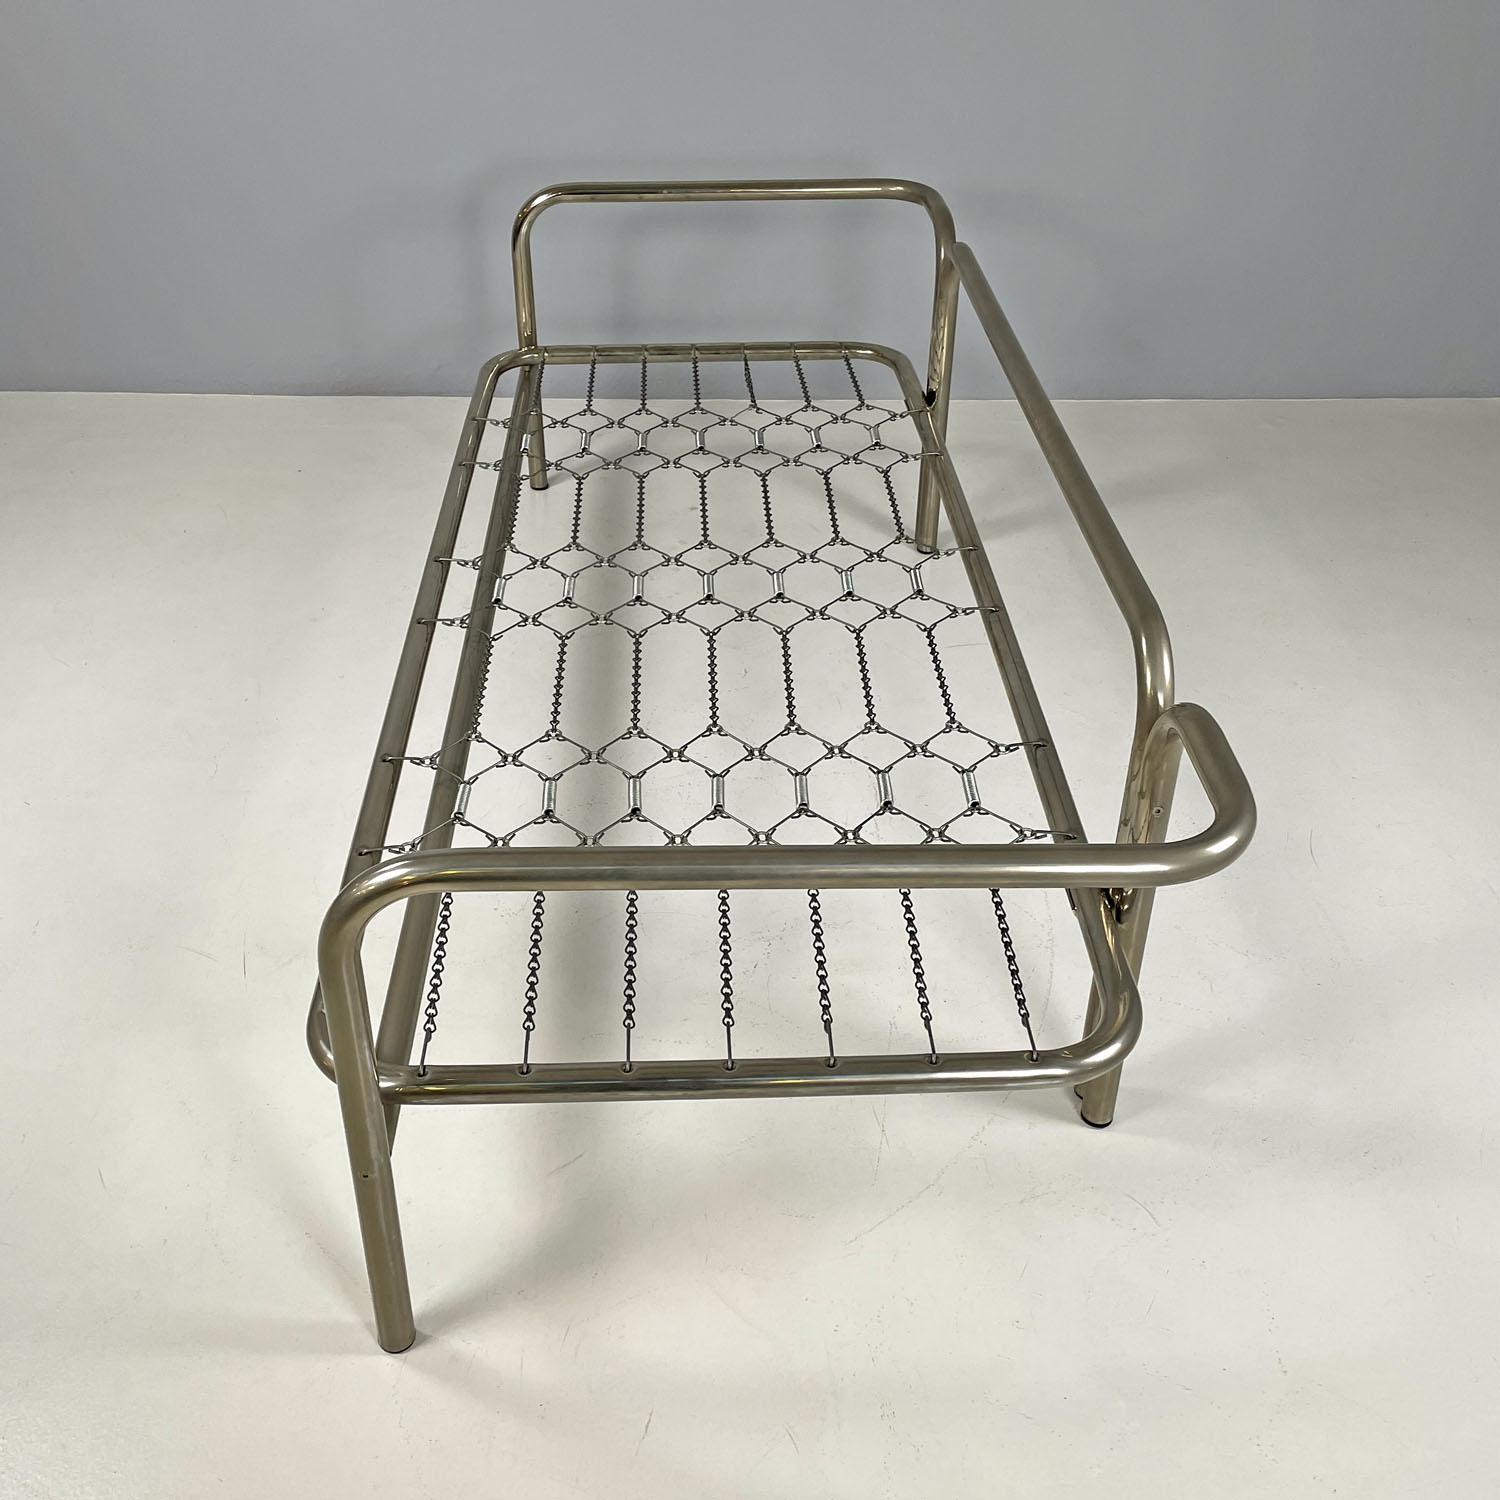 Metal Italian modern daybed sofa Locus Solus by Gae Aulenti for Poltronova, 1970s For Sale